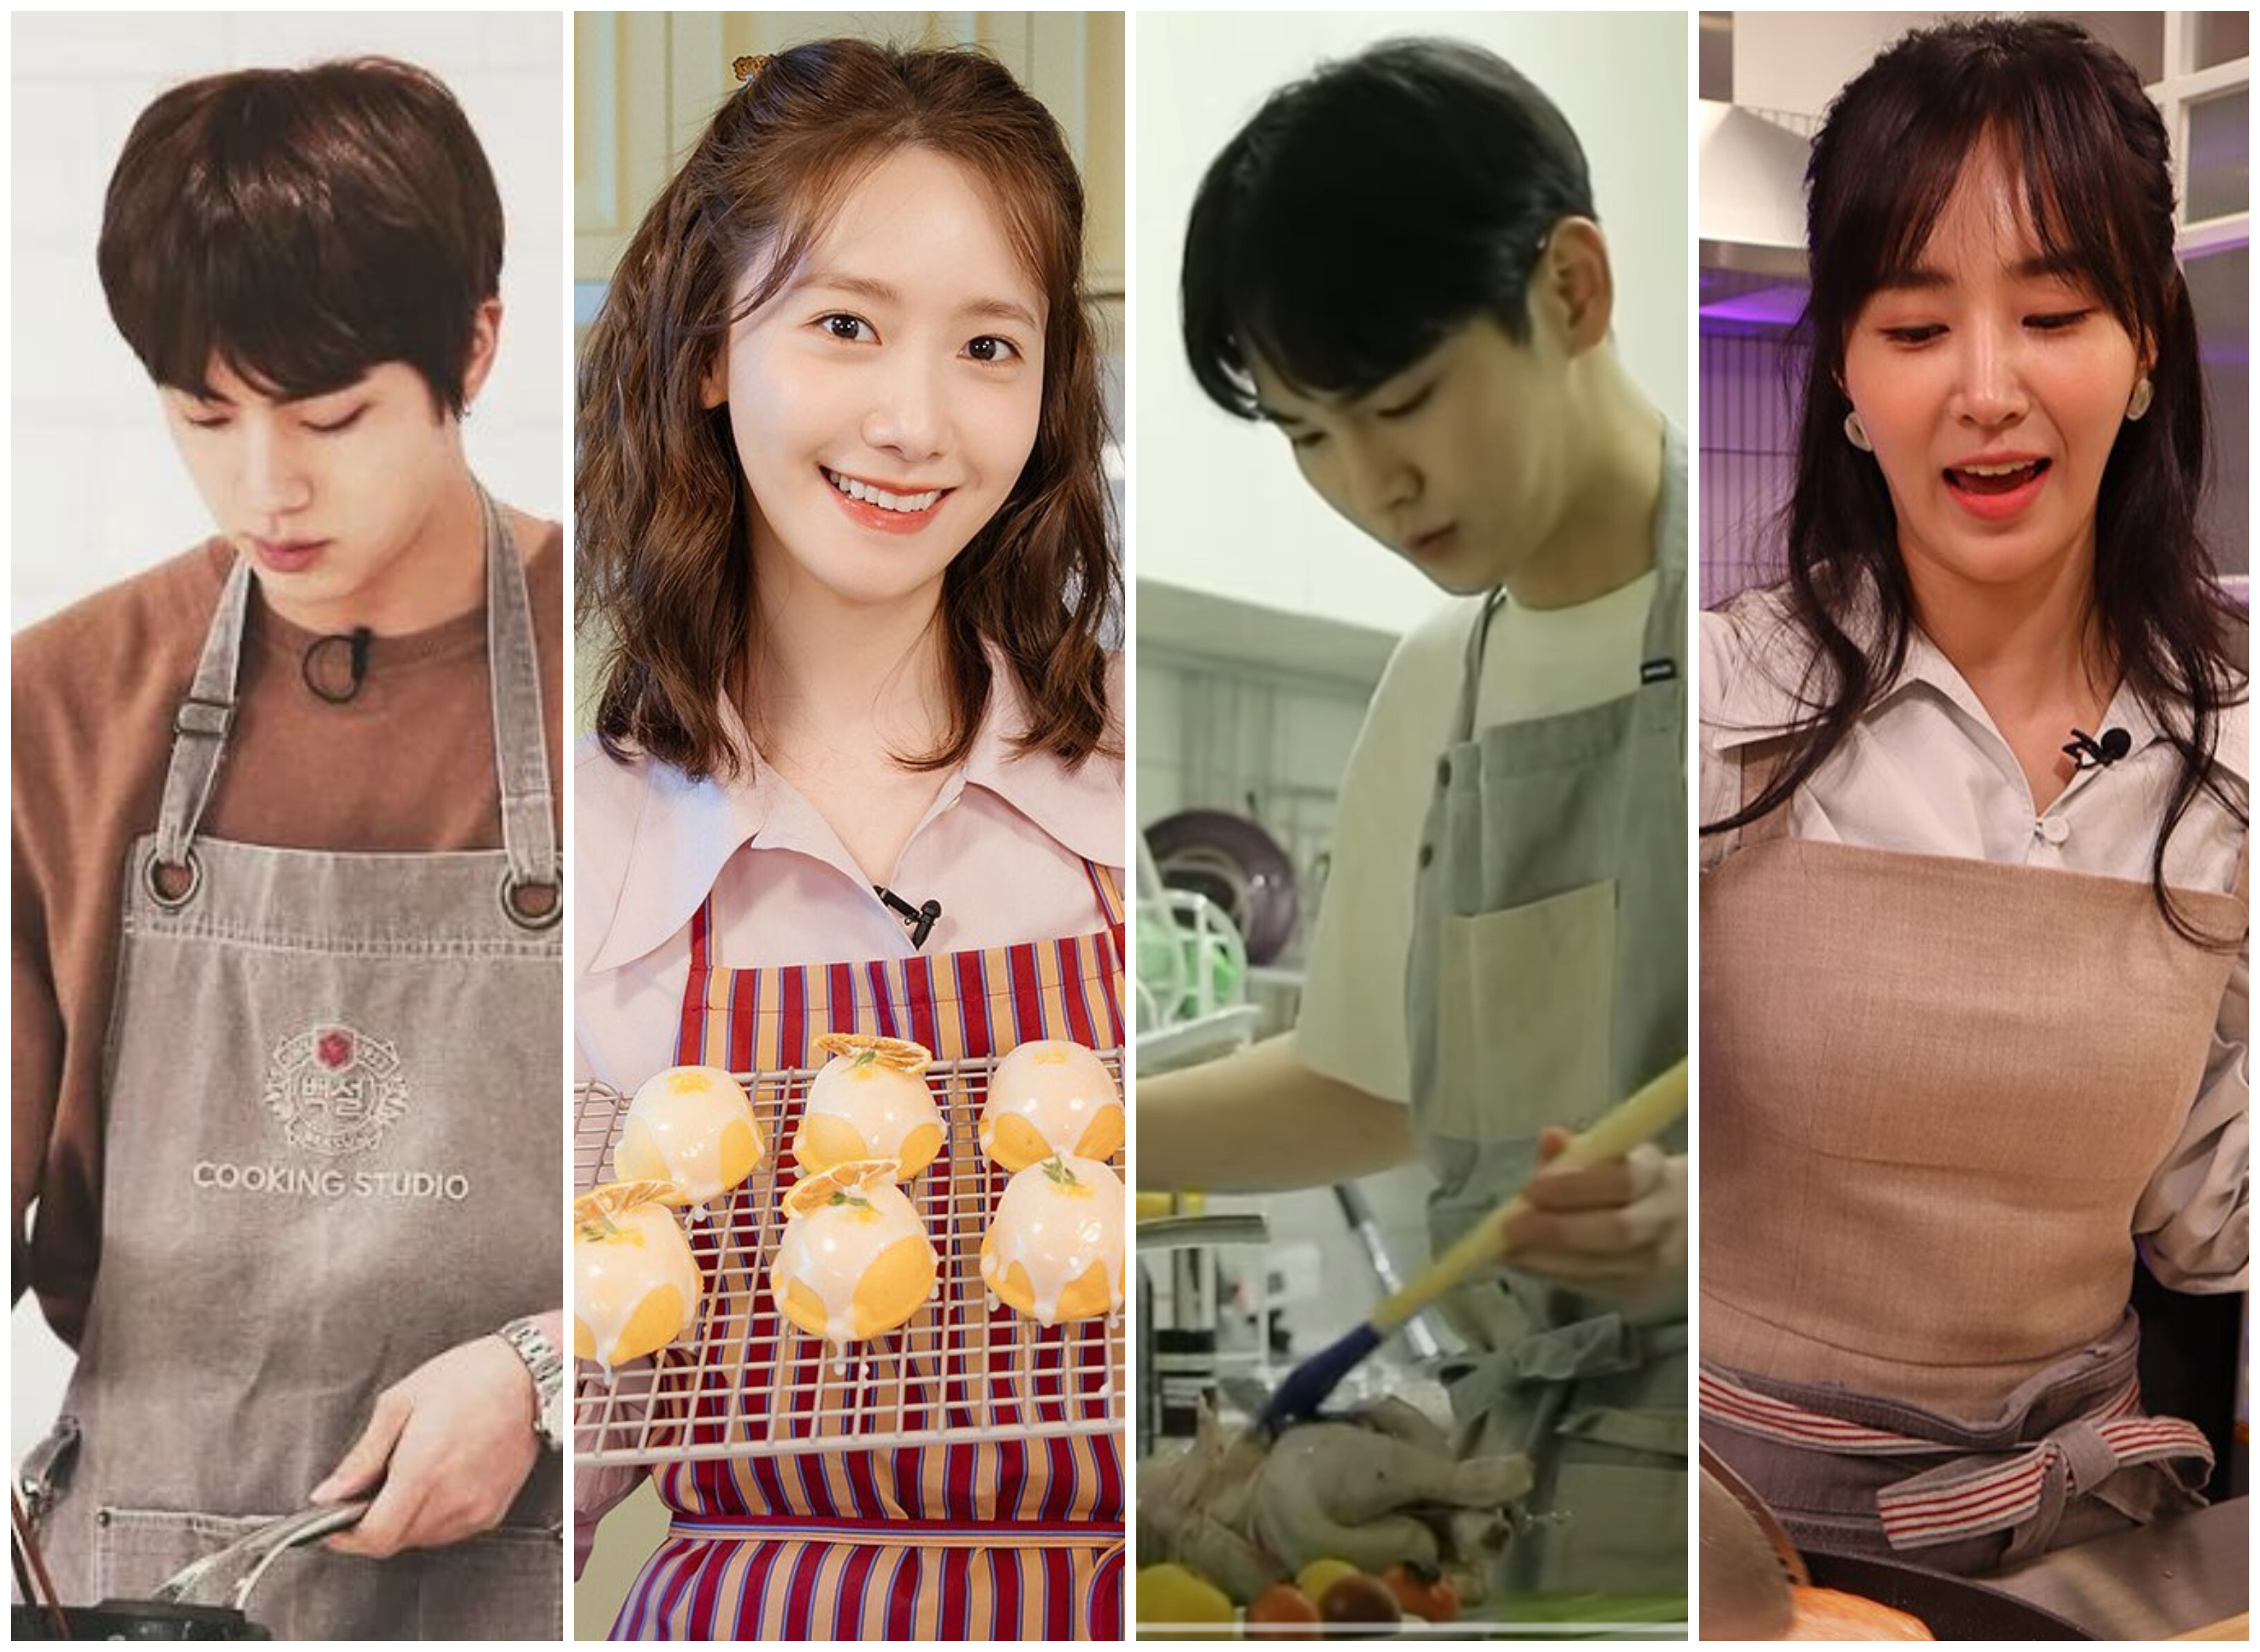 BTS’ Jin, Girls’ Generation’s Yoona, Shinee’s Key and Girls’ Generation’s Yuri cooking up a storm for fans – is there anything these idols can’t do? Photos: YouTube, @limyoona__official; @sm_ccc_lab/Instagram; @karol16/Pinterest